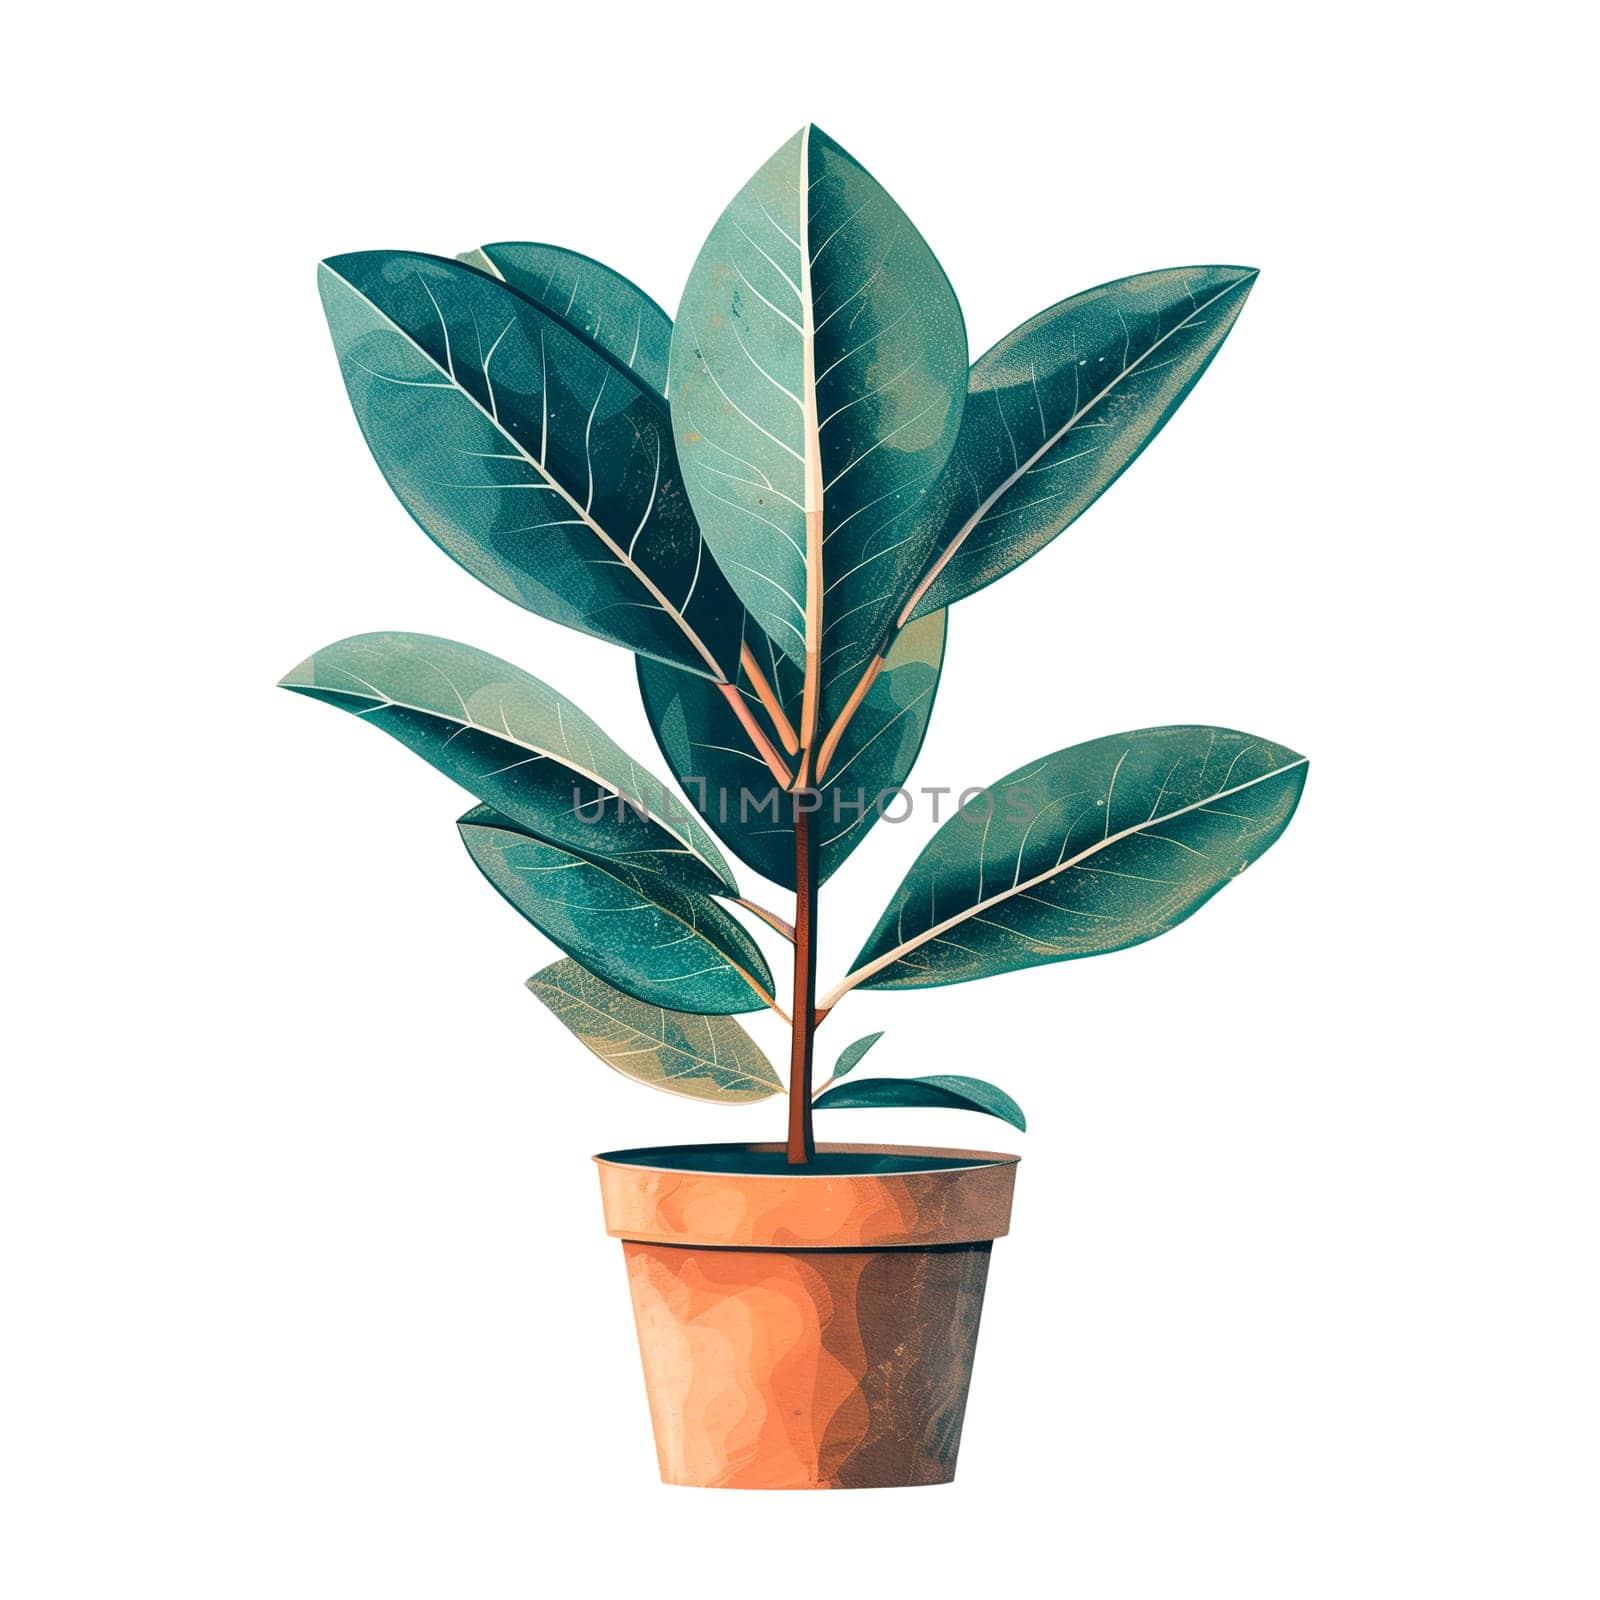 Isolated illustration of a rubber plant in pot by Dustick